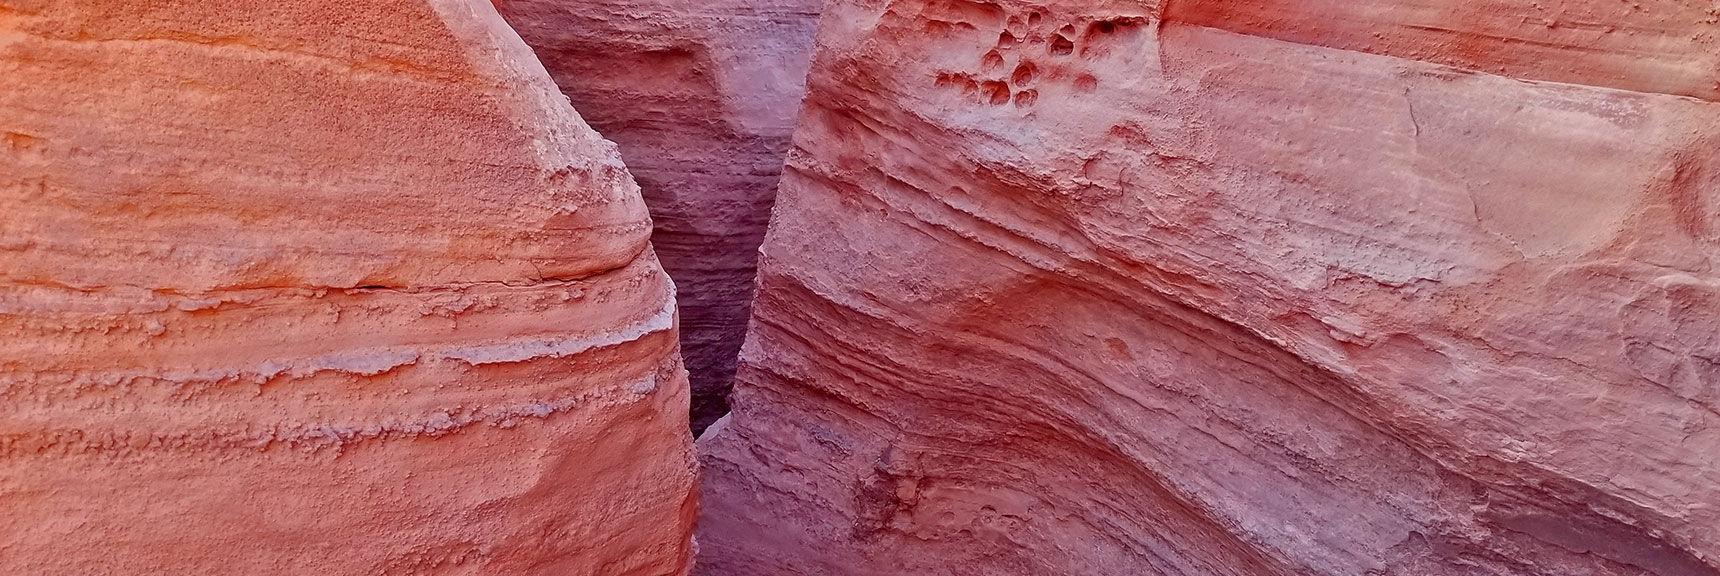 Try Squeezing Through This Openingon Natural Arches Trail, Valley of Fire State Park, Nevada